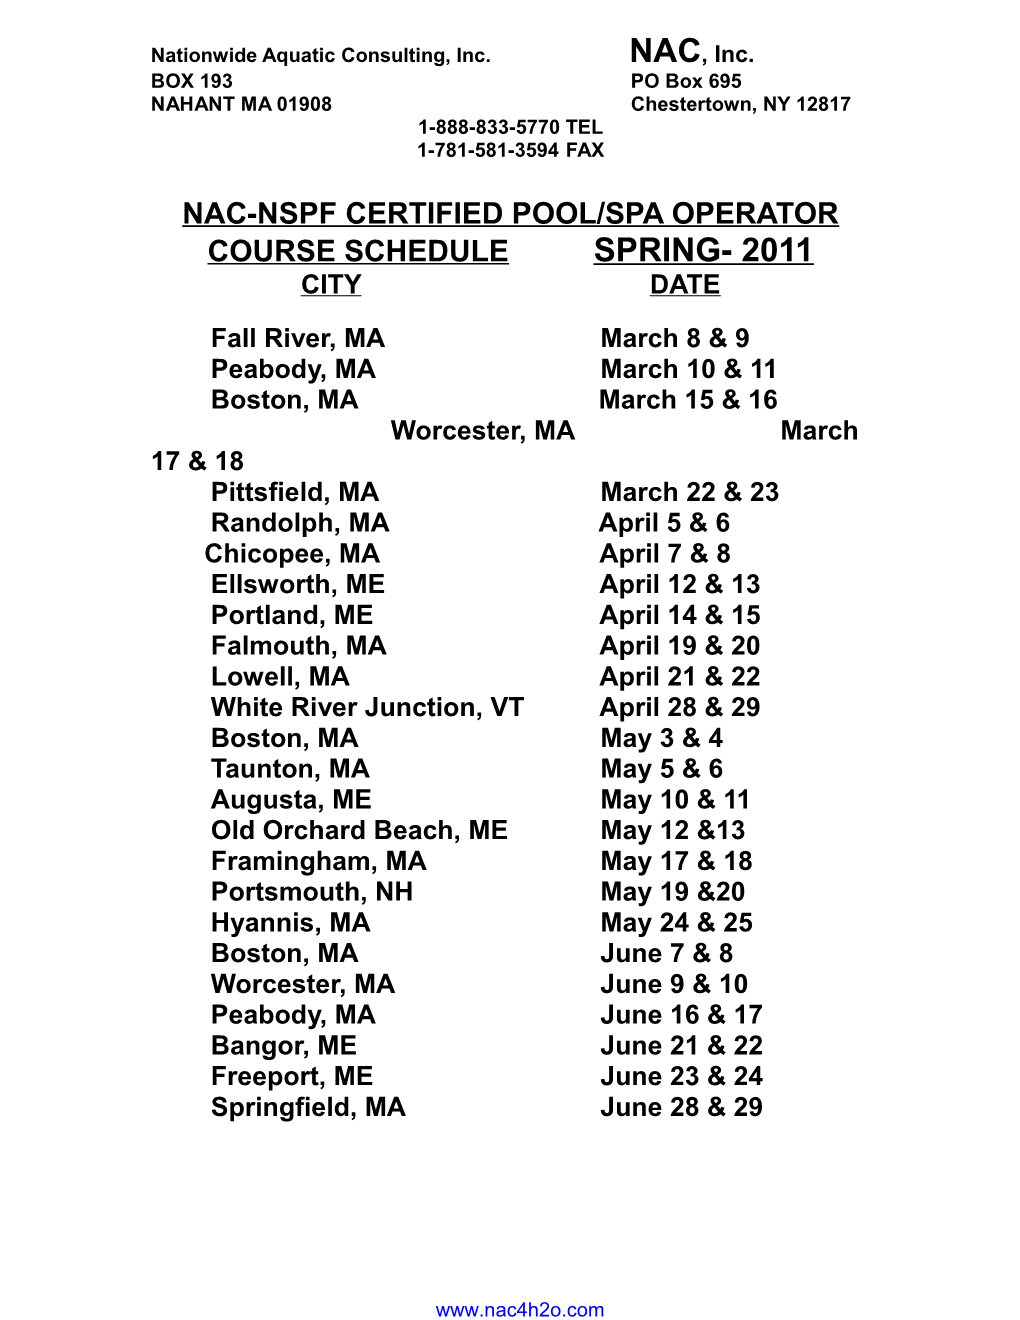 Nac-Nspf Certified Pool/Spa Operator Course Schedule